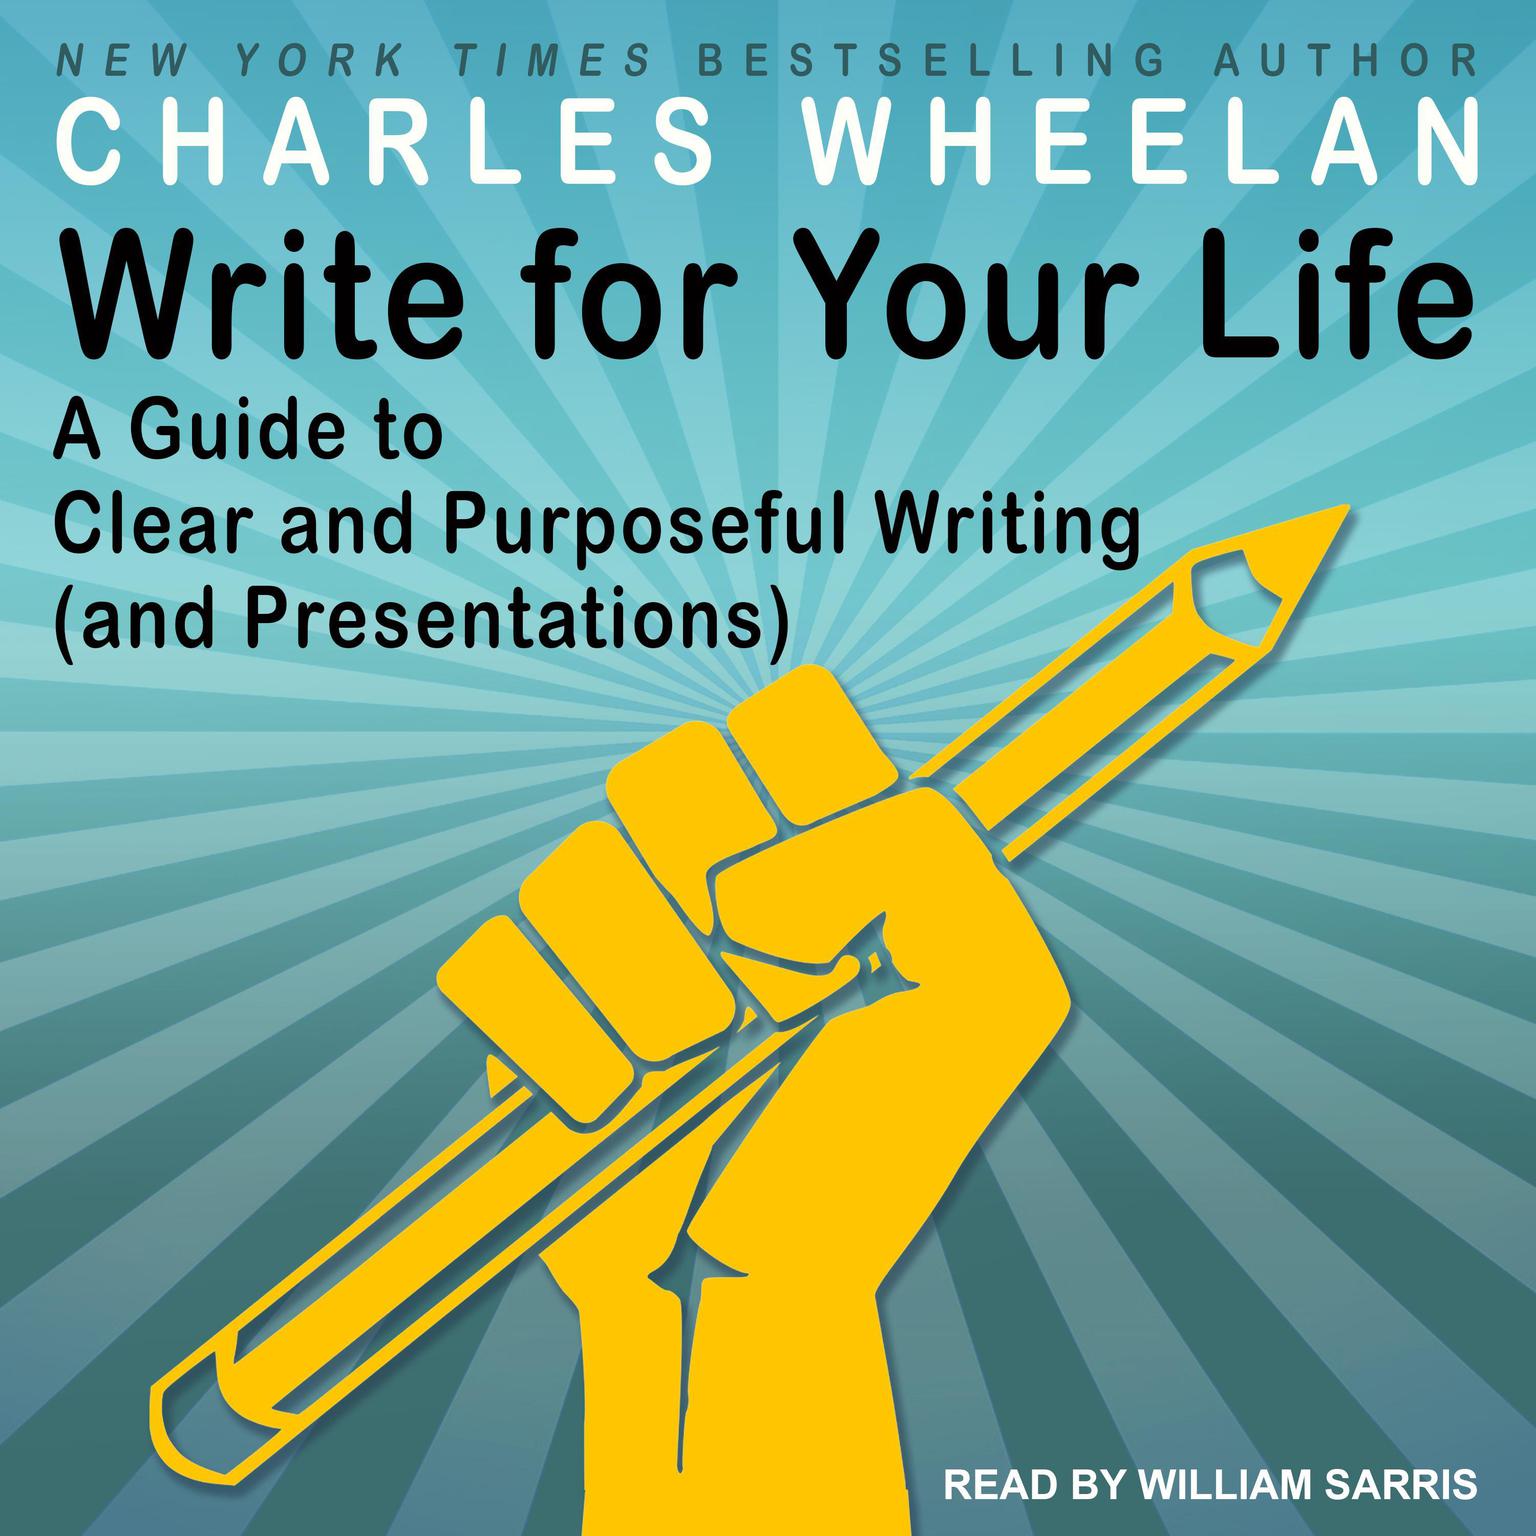 Write for Your Life: A Guide to Clear and Purposeful Writing (and Presentations) Audiobook, by Charles Wheelan